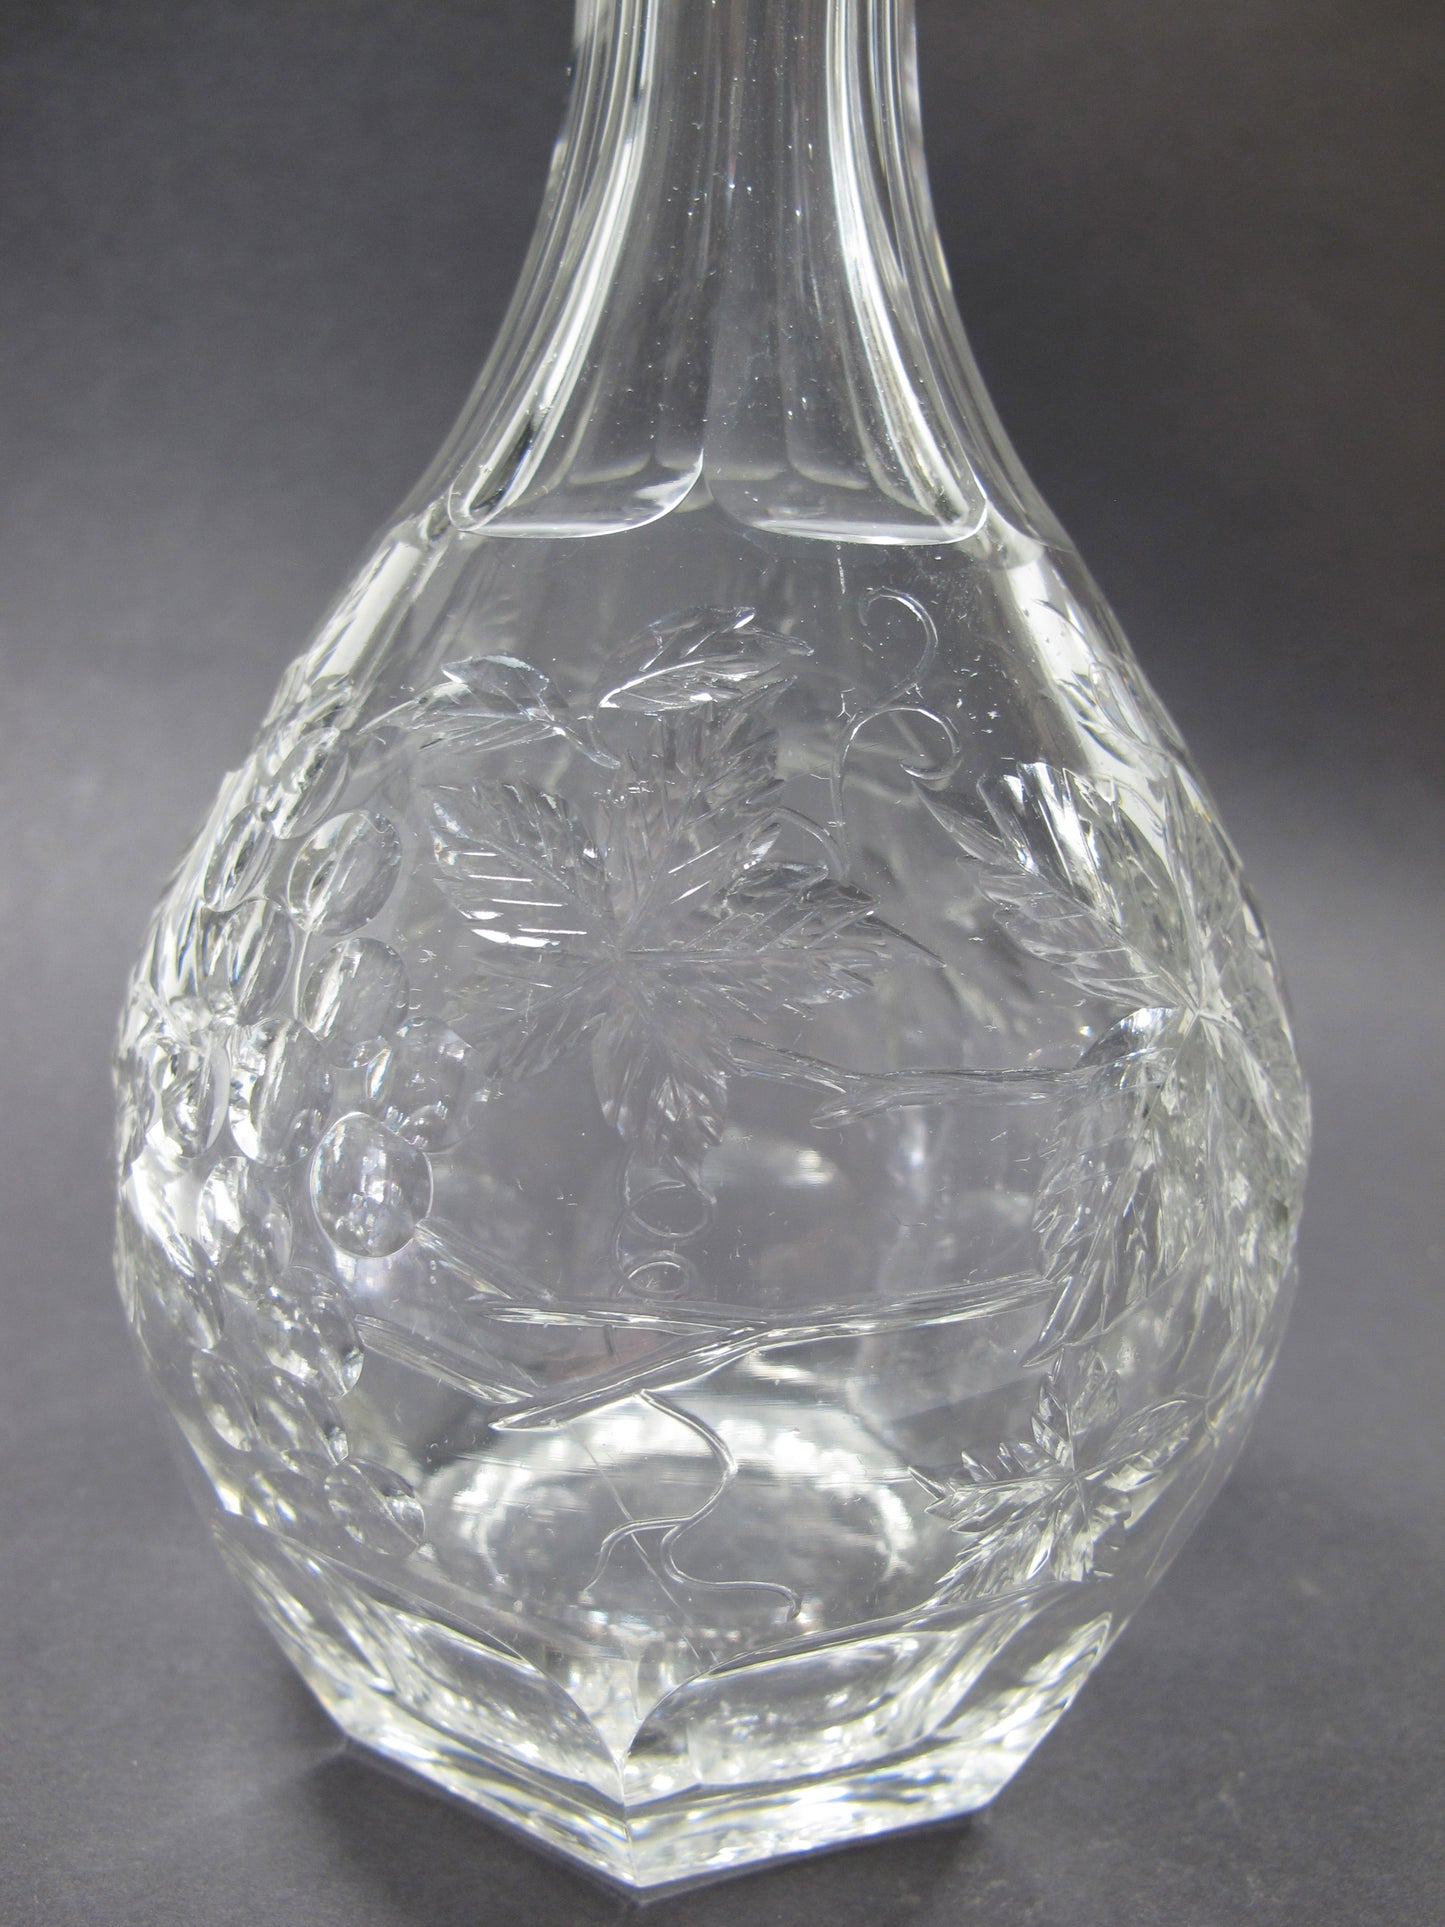 American Brilliant Period Cut Glass decanter grapes,  Antique  ABP - O'Rourke crystal awards & gifts abp cut glass